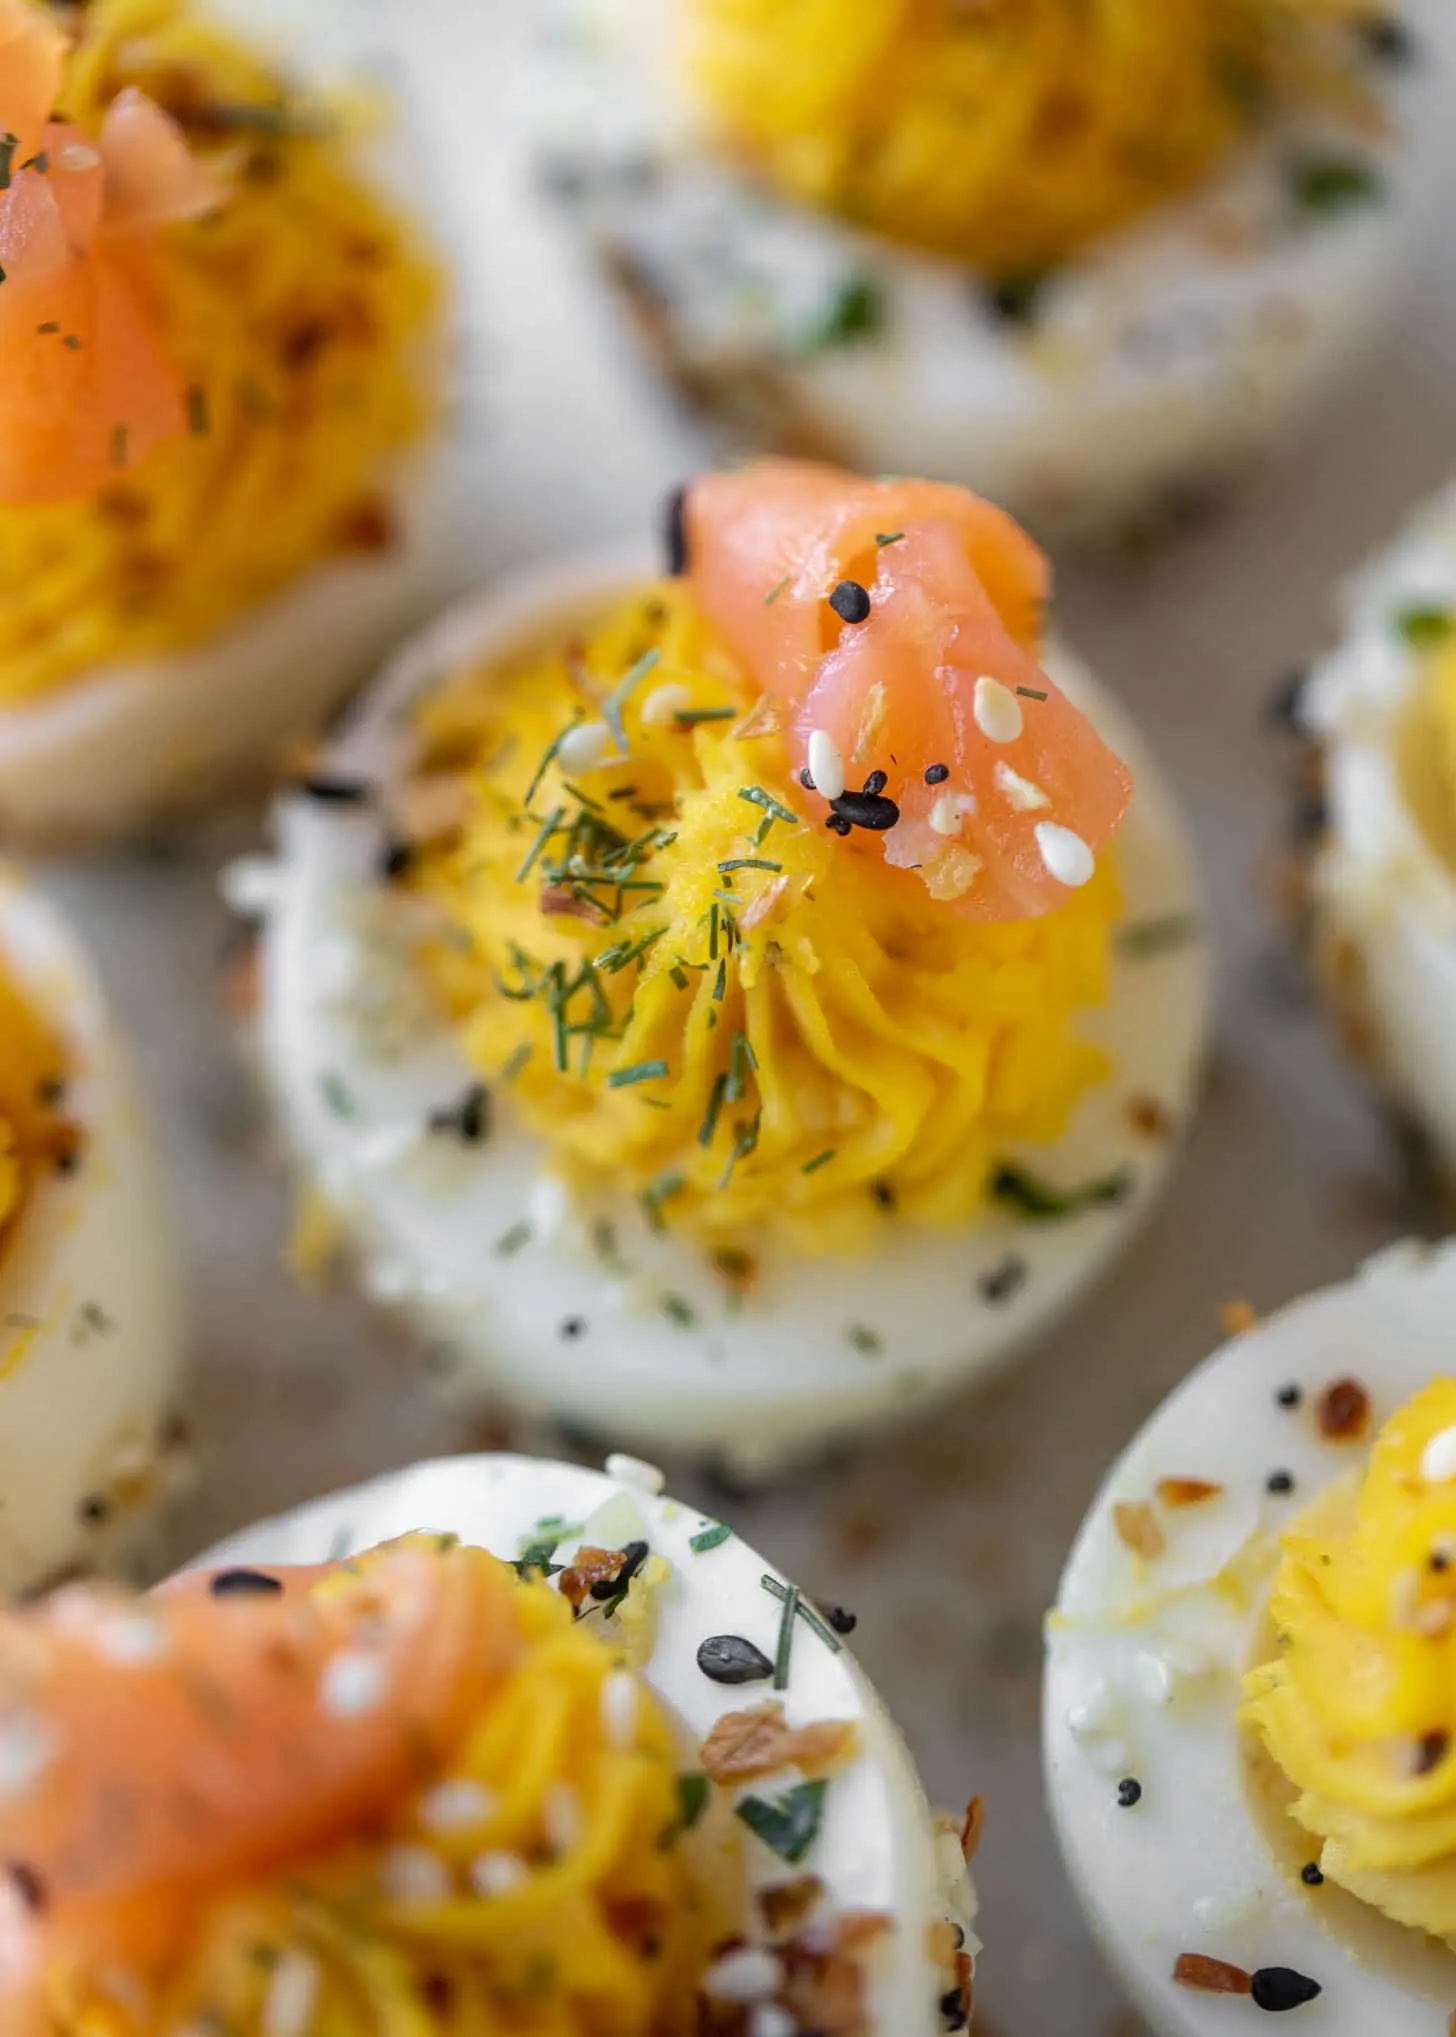 deviled eggs with smoked salmon recipe - How to make deviled eggs the night before